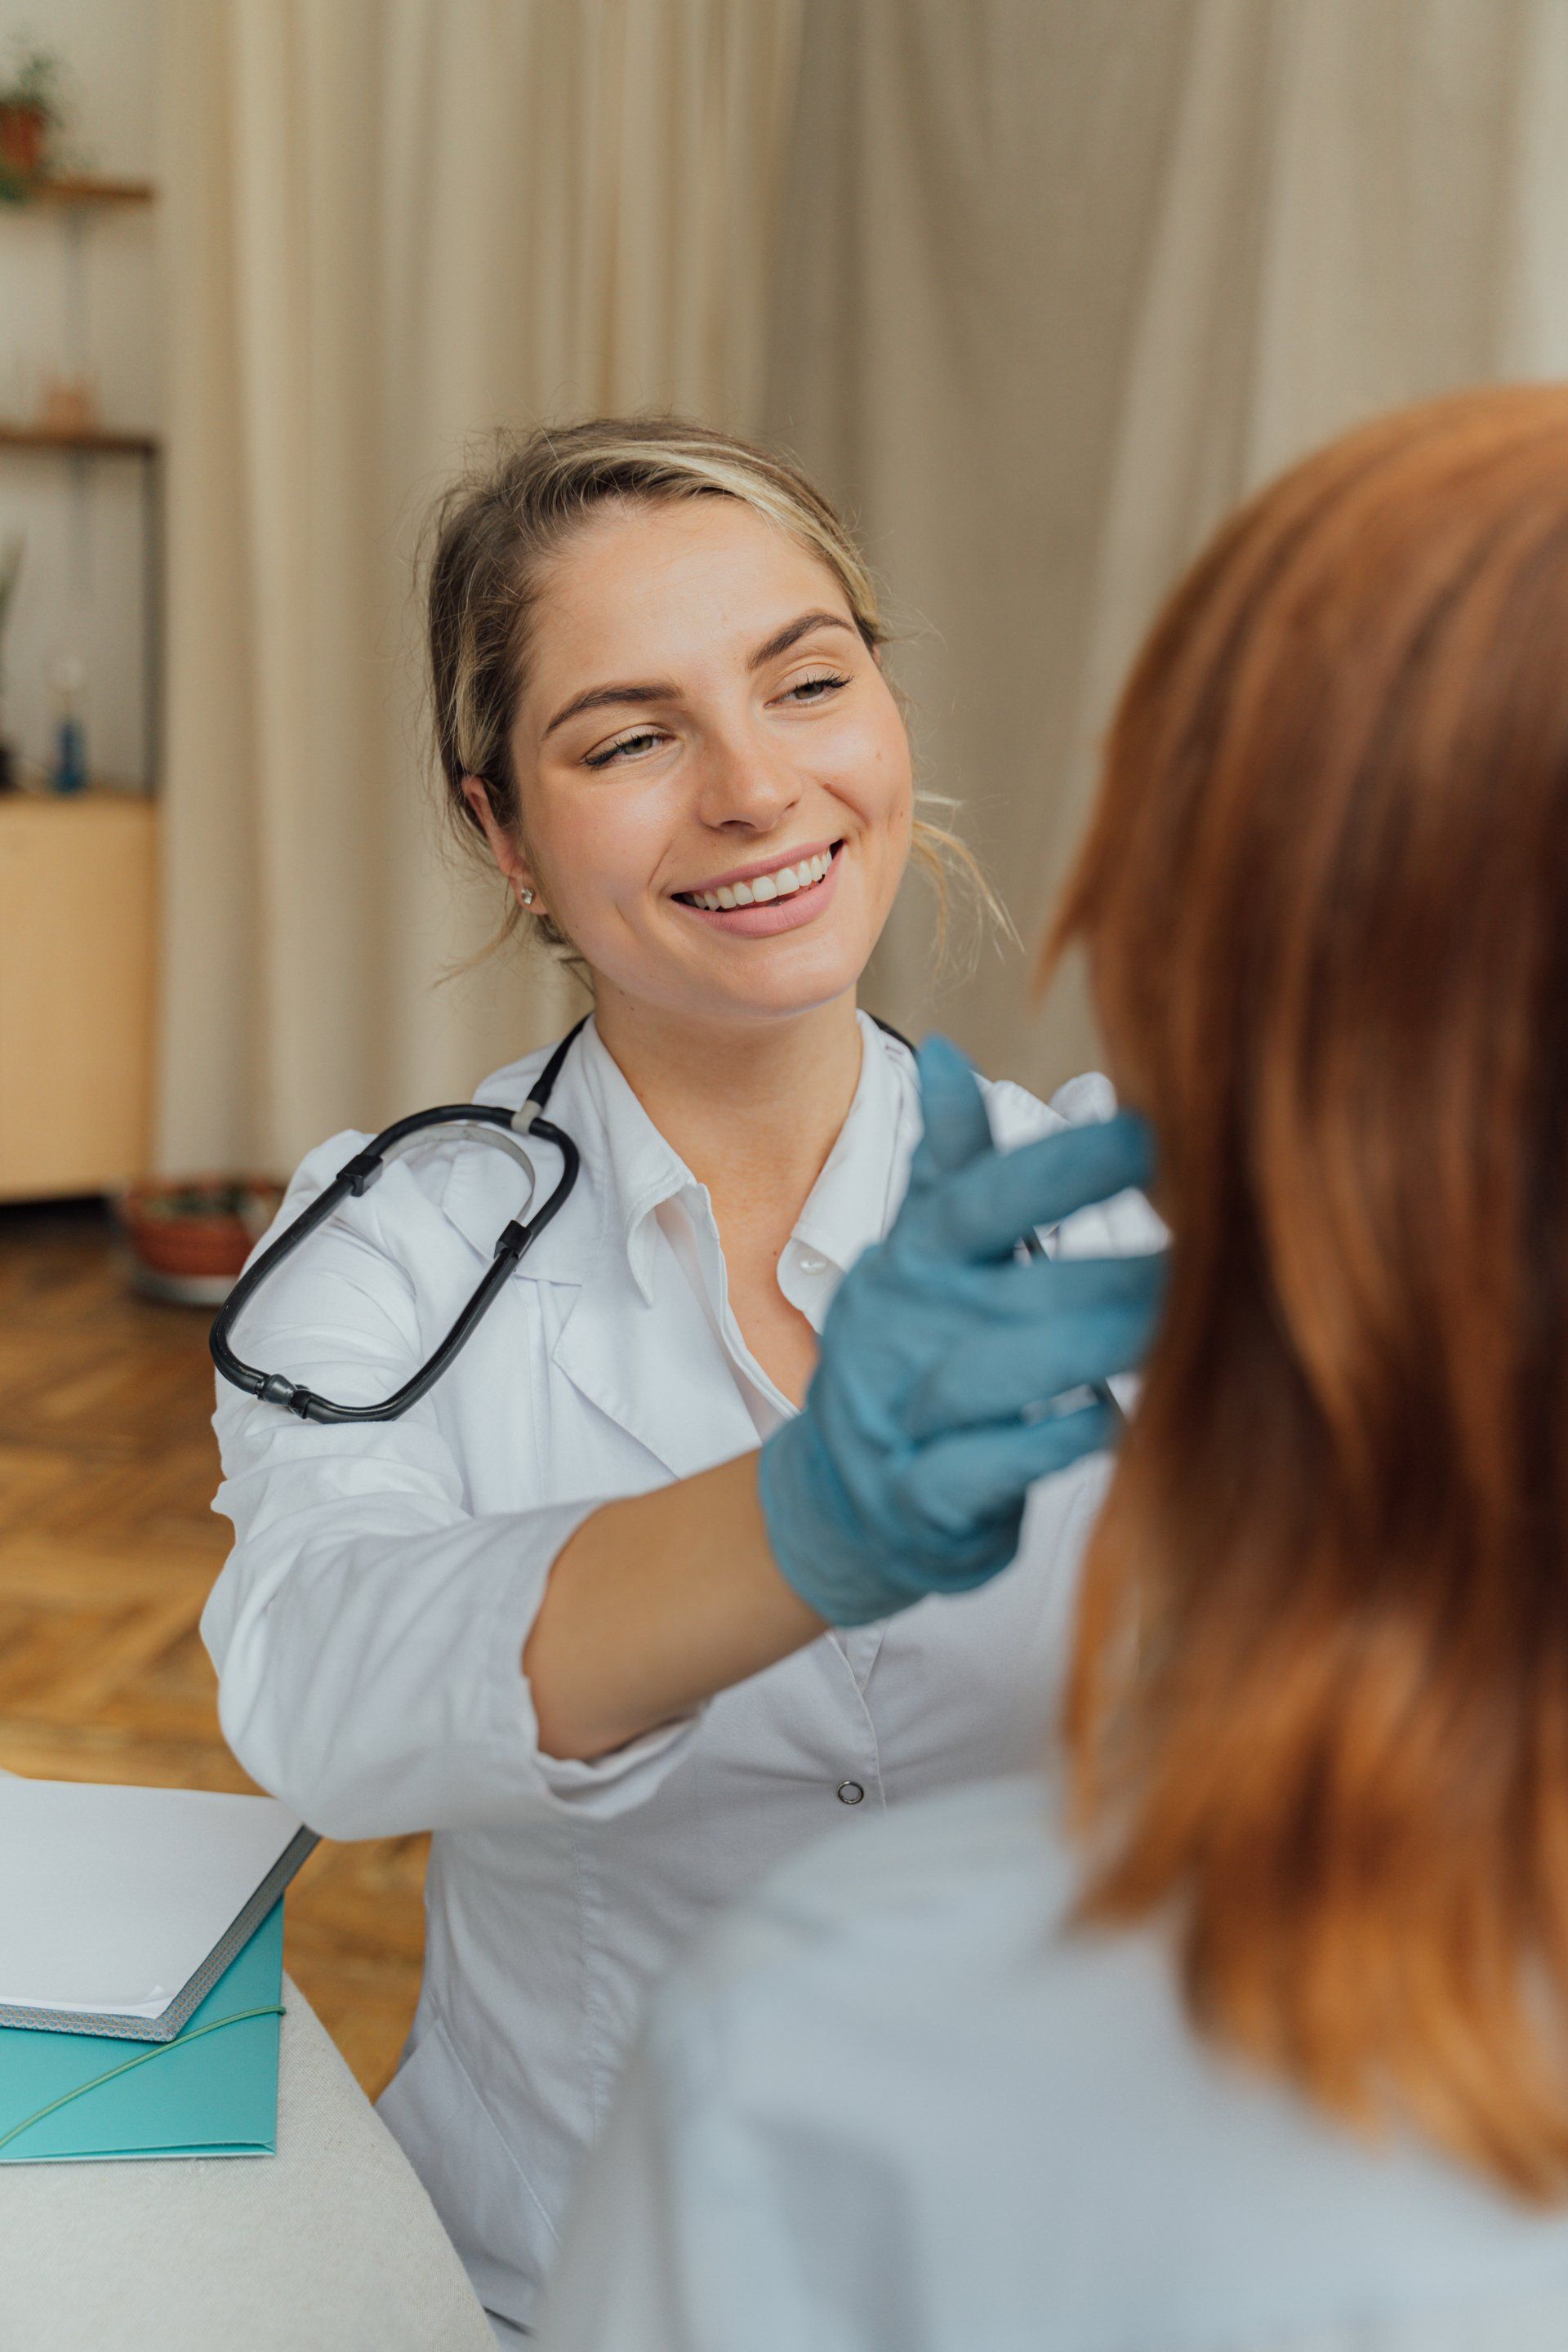 A female doctor is smiling while talking to a patient.